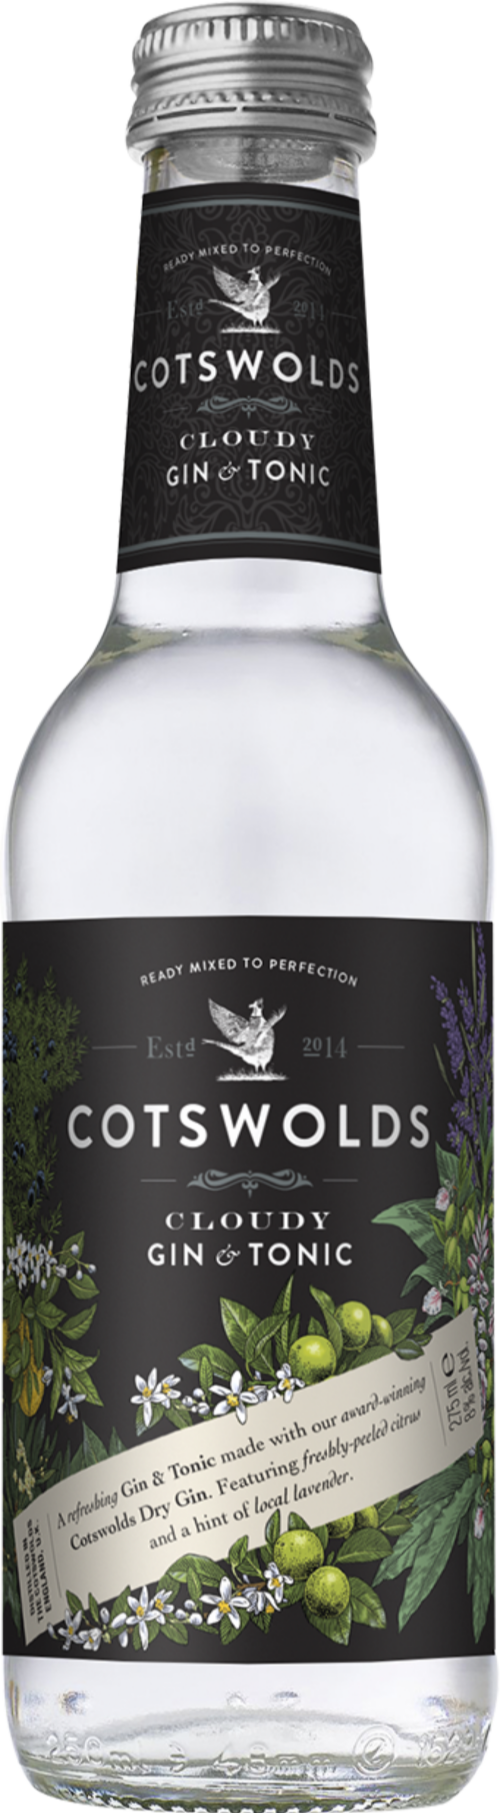 COTSWOLD DISTILLERY Cloudy Gin & Tonic RTD 8% ABV 275ml